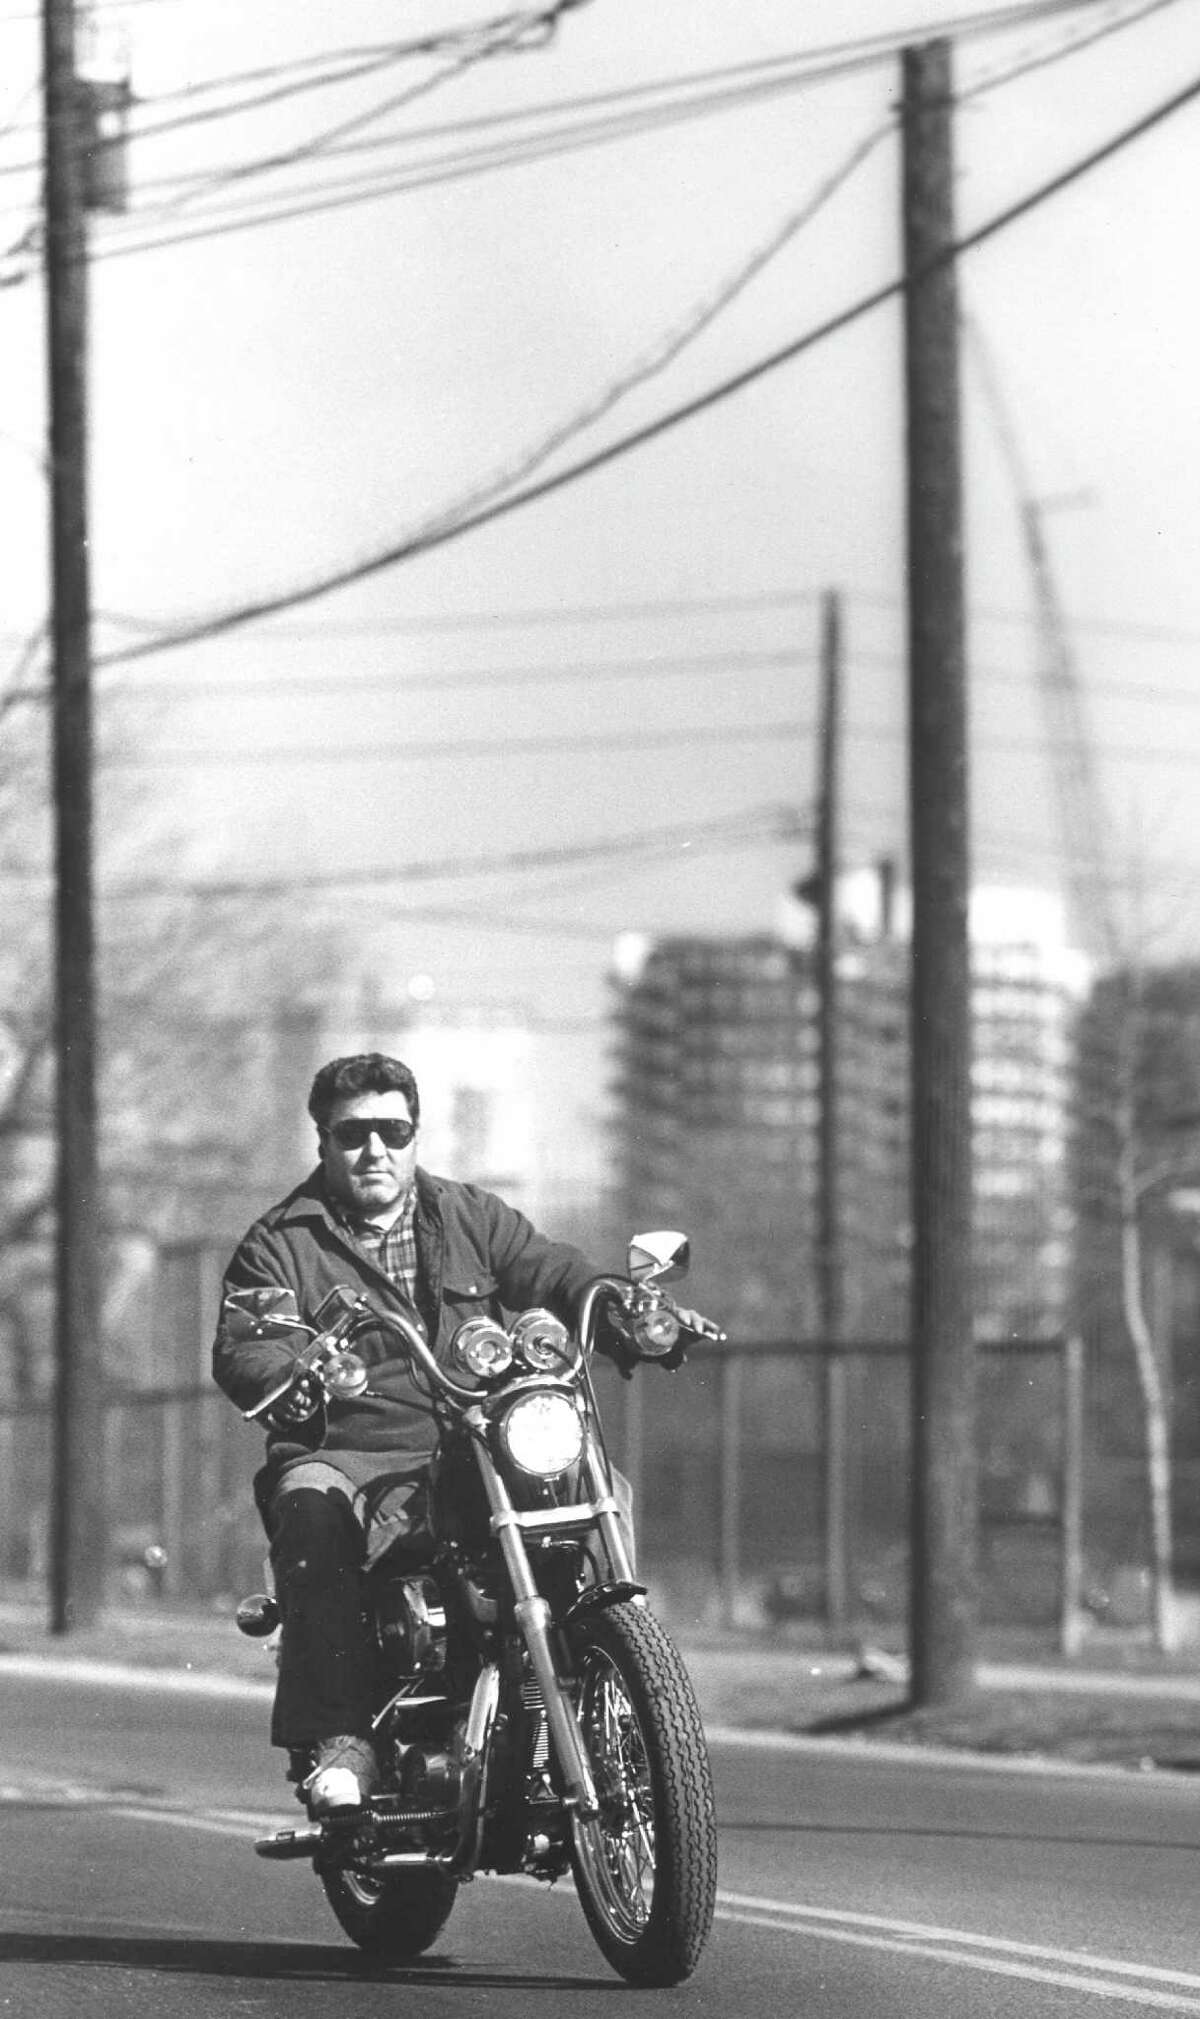 With temperatures in the high 40s, Nick Pisanelli takes his new Harley Davidson out for the first time on Feb. 18, 1988. But first, he had to push it to a cycle shop to get it started.